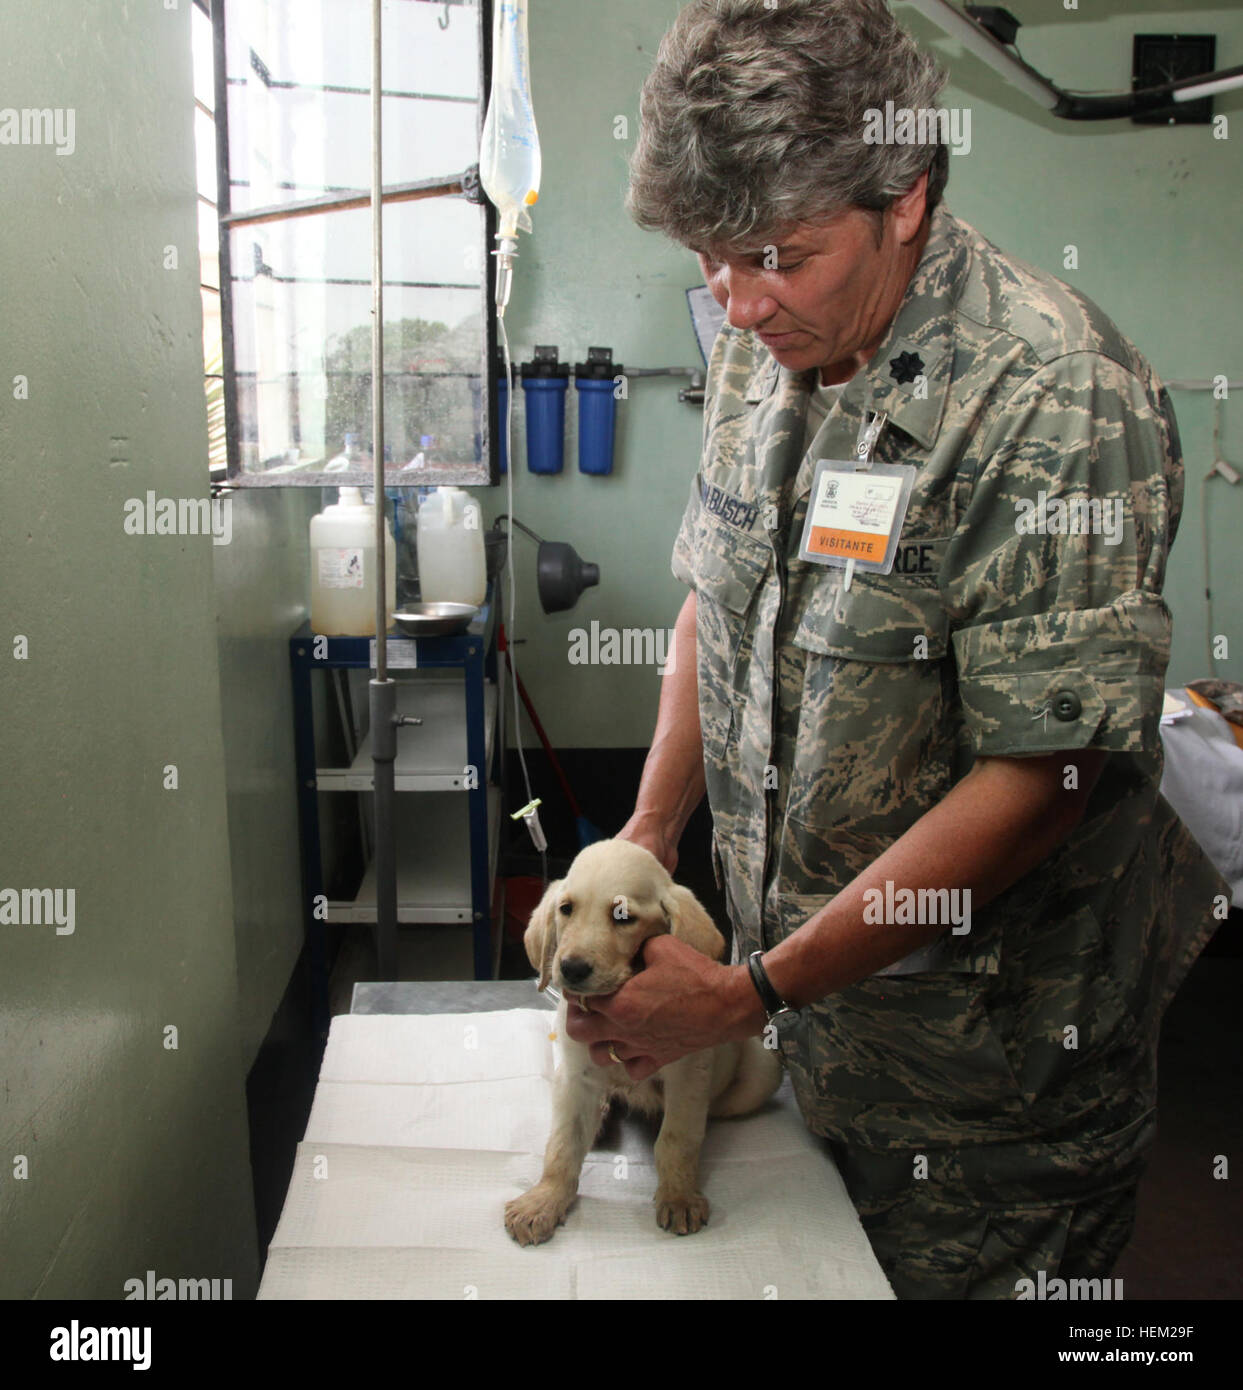 Lt. Col. Tammy Von Busch, lead veterinarian, embarked aboard High Speed Vessel (HSV 2) Swift, holds a puppy while she receives fluids on Base Naval de Callao during HSV-Southern Partnership Station 2012. Von Busch is participating in a subject matter expert exchange regarding military working dogs. The two different militaries are working together at the Callao Naval base as a part of HSV-SPS 12. HSV-SPS is an annual deployment of U.S. Navy ships and assets to the U.S. Southern Command's area of responsibility in the Caribbean, Central and South America. HSV-2 Swift-Southern Partnership Statio Stock Photo